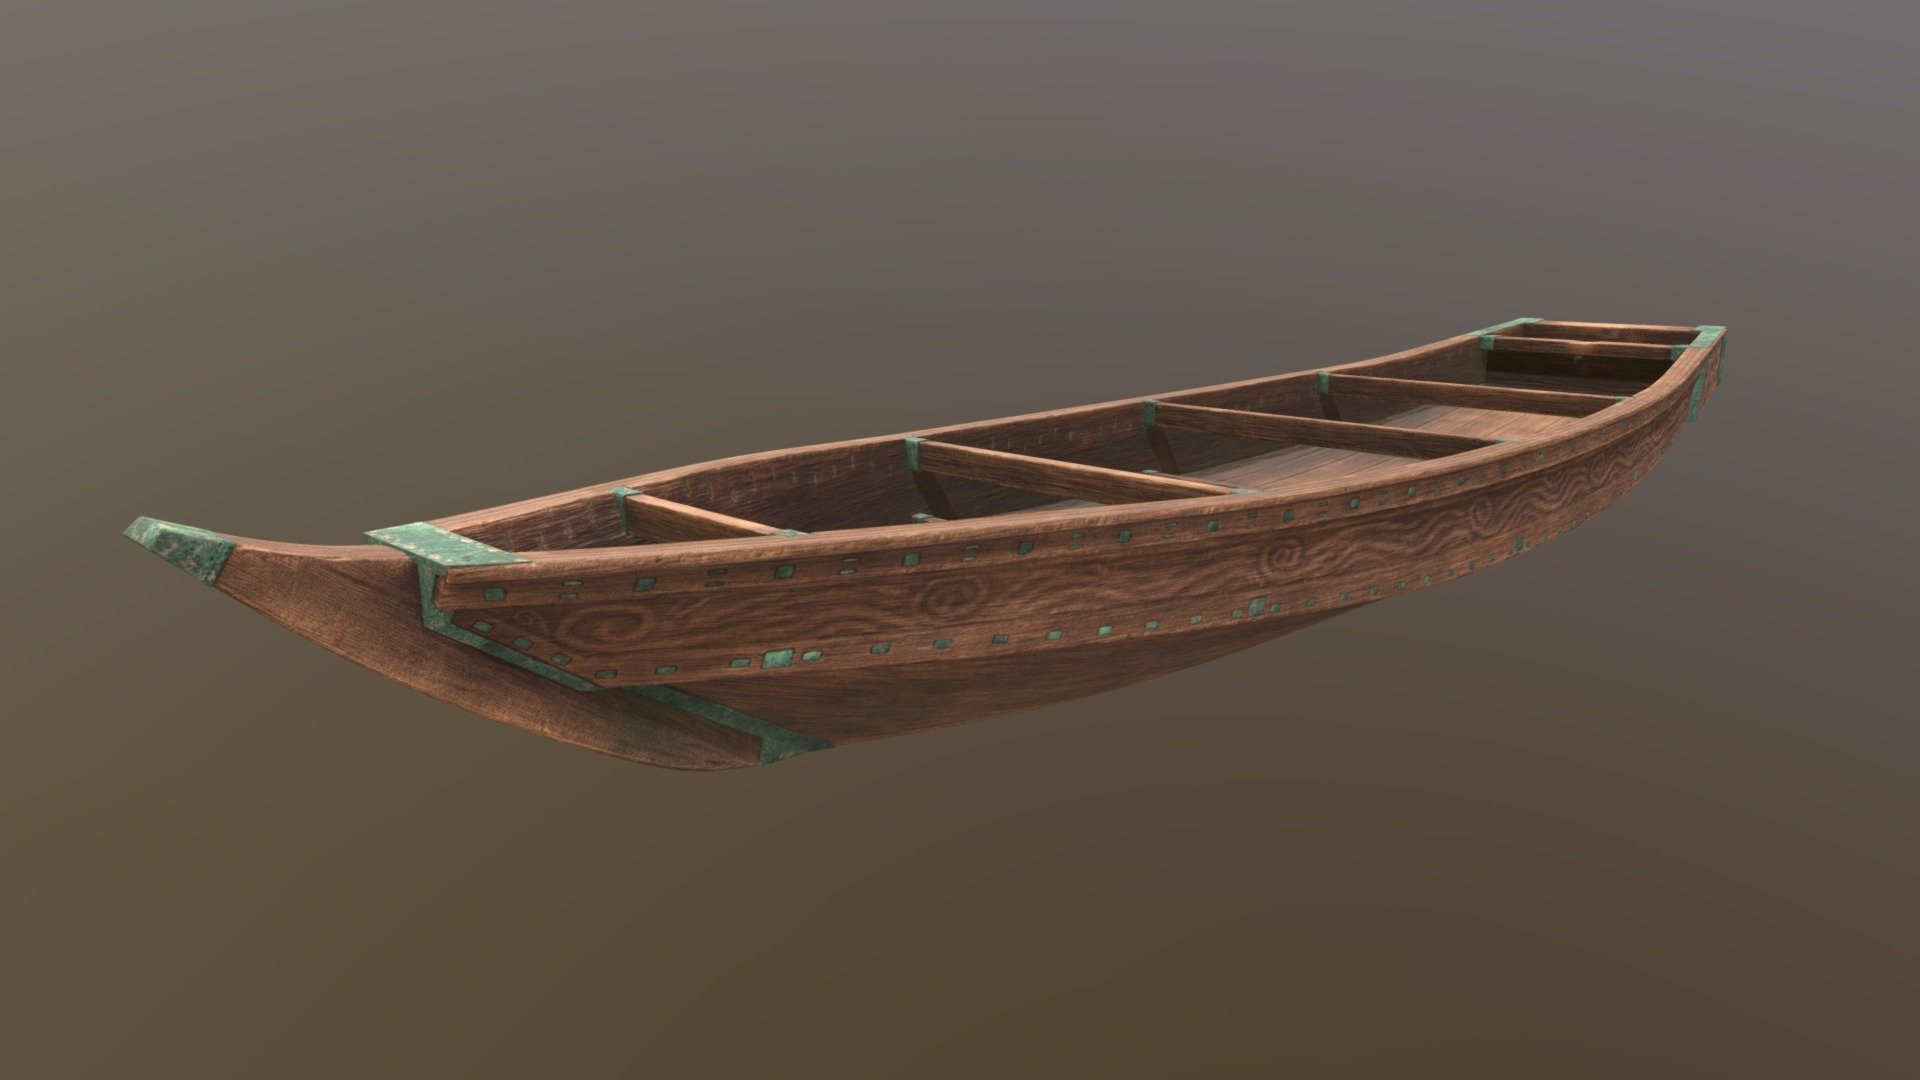 It's a 3D boat model I've done for my personal Unreal Engine 5 project. Modelling is done in Blender, then sculpting in ZBrush, and at the end texturing in Substance Painter. I left some extra geometry at the back of the boat (concave rectangular shapes) because it will be the most visible side in the final project but in the end, baked details look so good that I would delete that geometry next time.
The shape was based on the Chokkibune Boat design (http://www.douglasbrooksboatbuilding.com/chokkibune.html), but I opted for darker wood and added some decorations on the sides.

Texture Density (4K): 756 px/m

ArtStation: https://www.artstation.com/artwork/Ea8Jxn - Wooden Boat - 3D model by Mixed8ananas 3d model